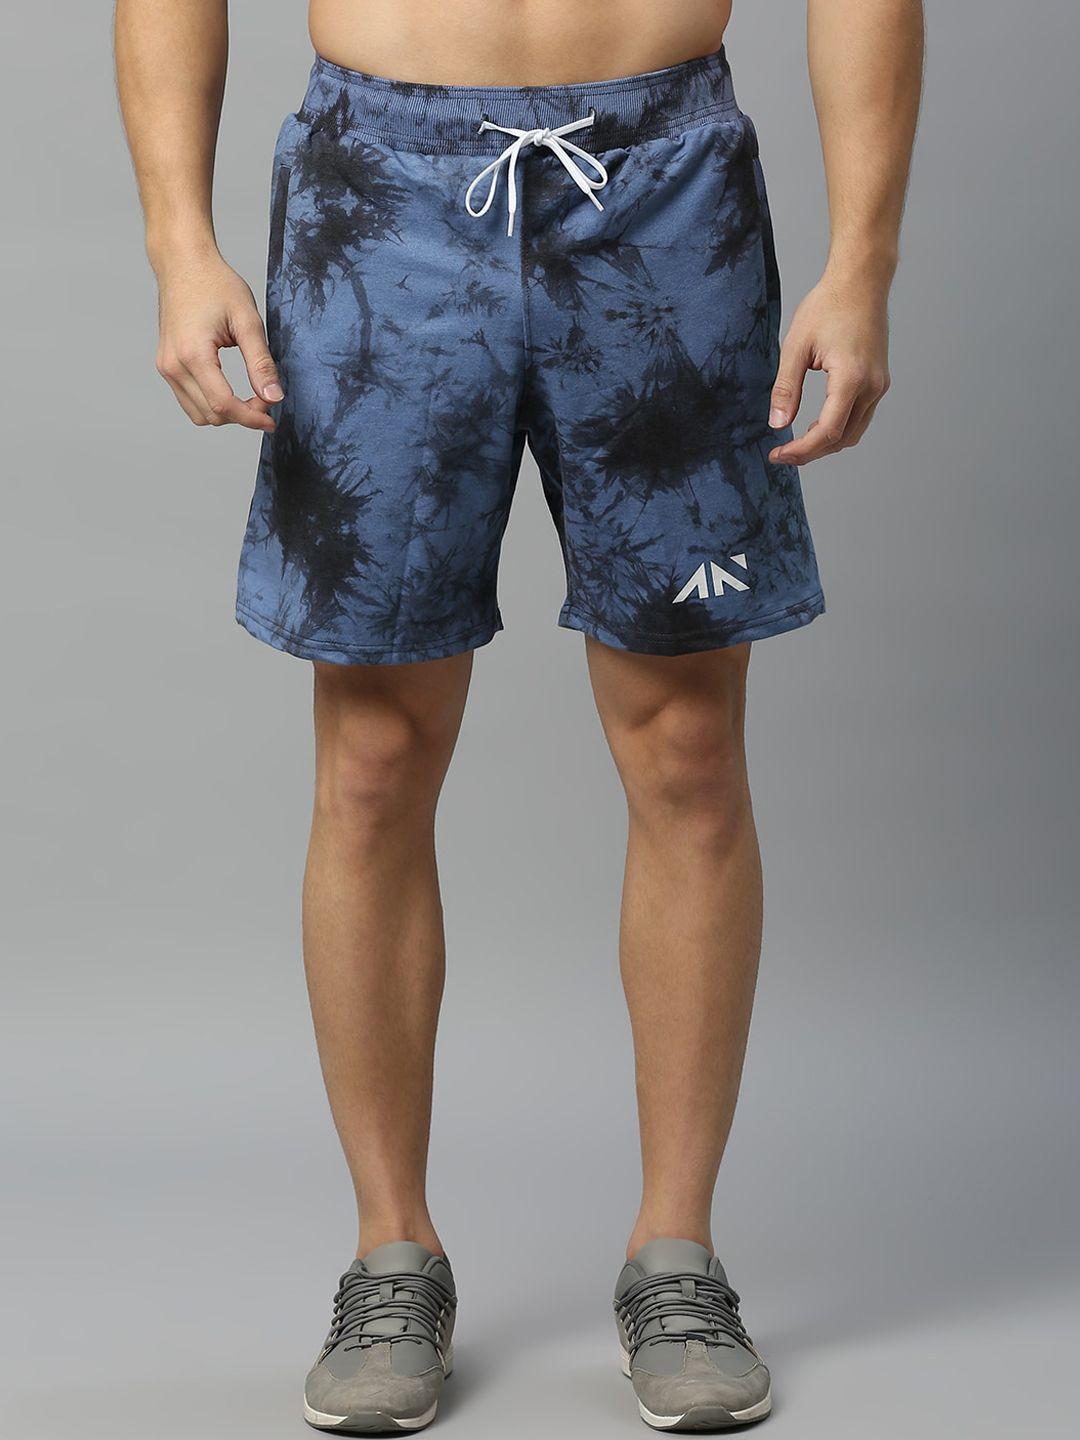 aesthetic nation men abstract printed mid-rise regular fit cotton sports shorts